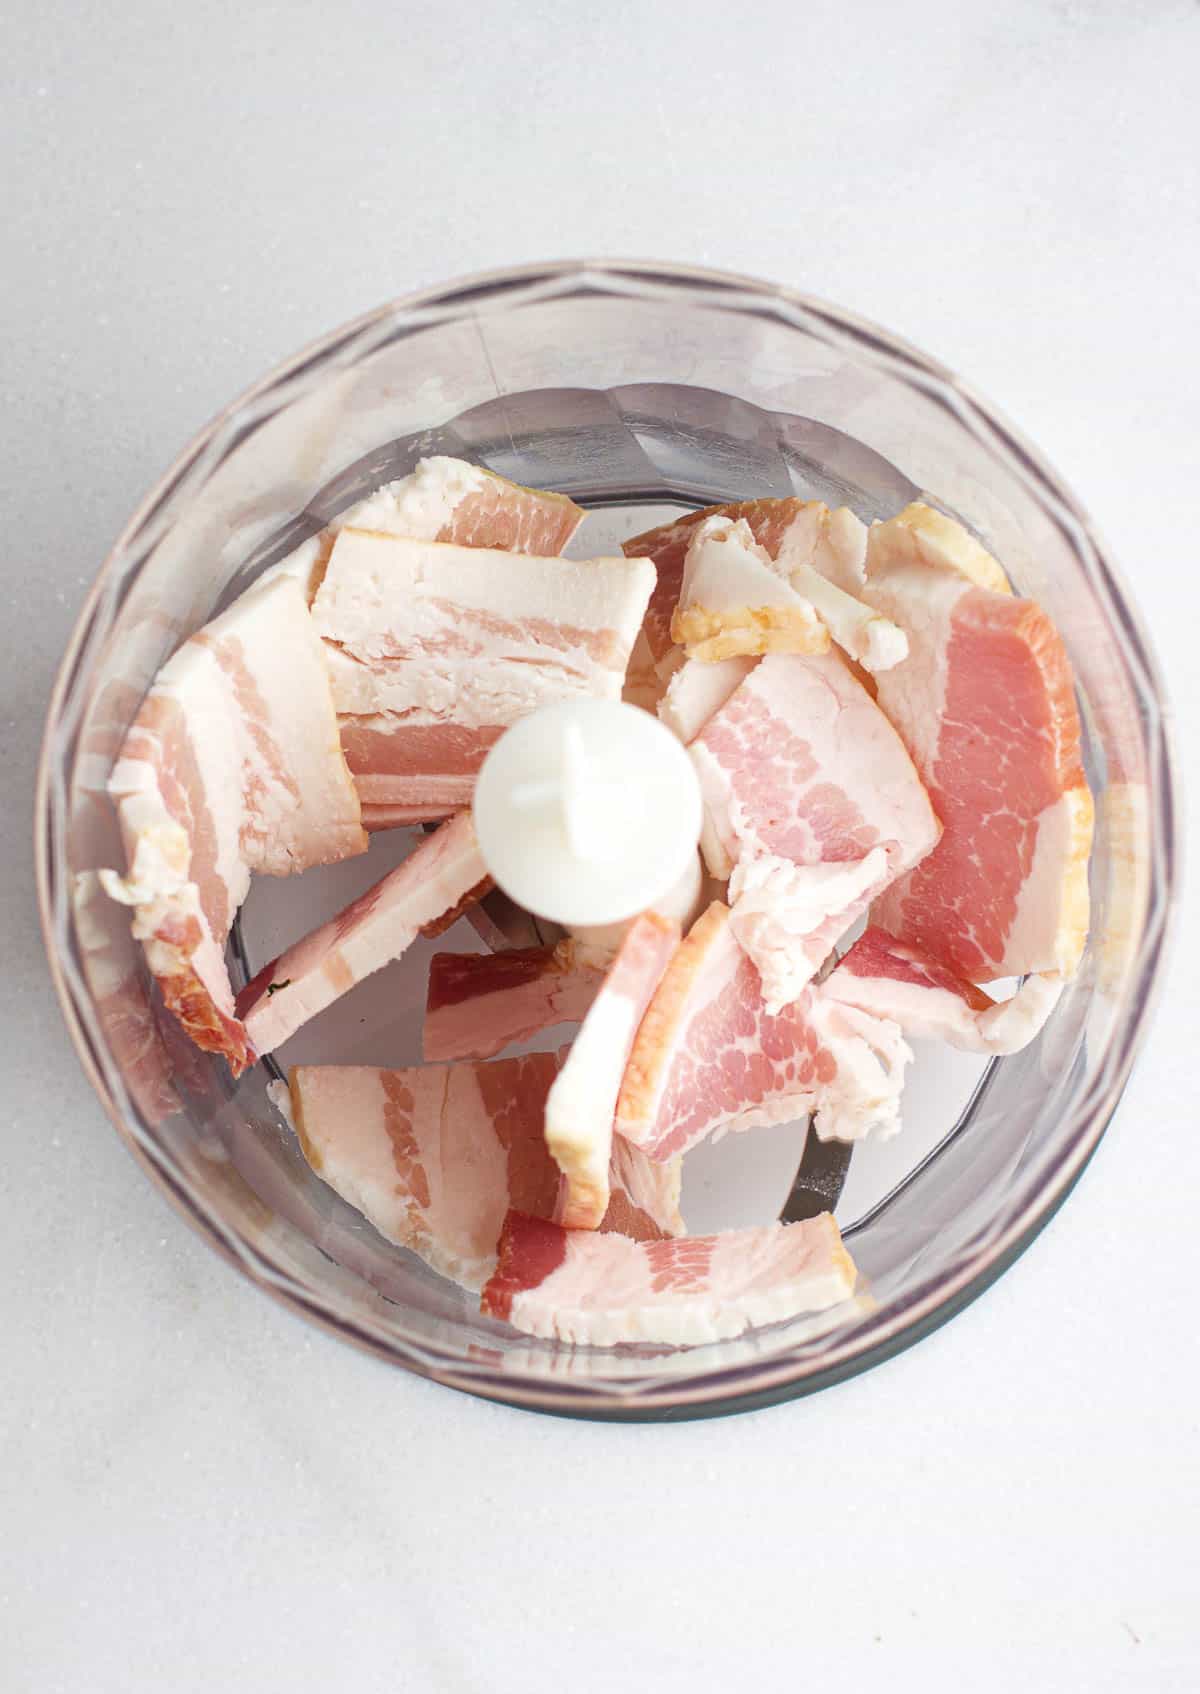 Chopped up raw bacon in a food processor.